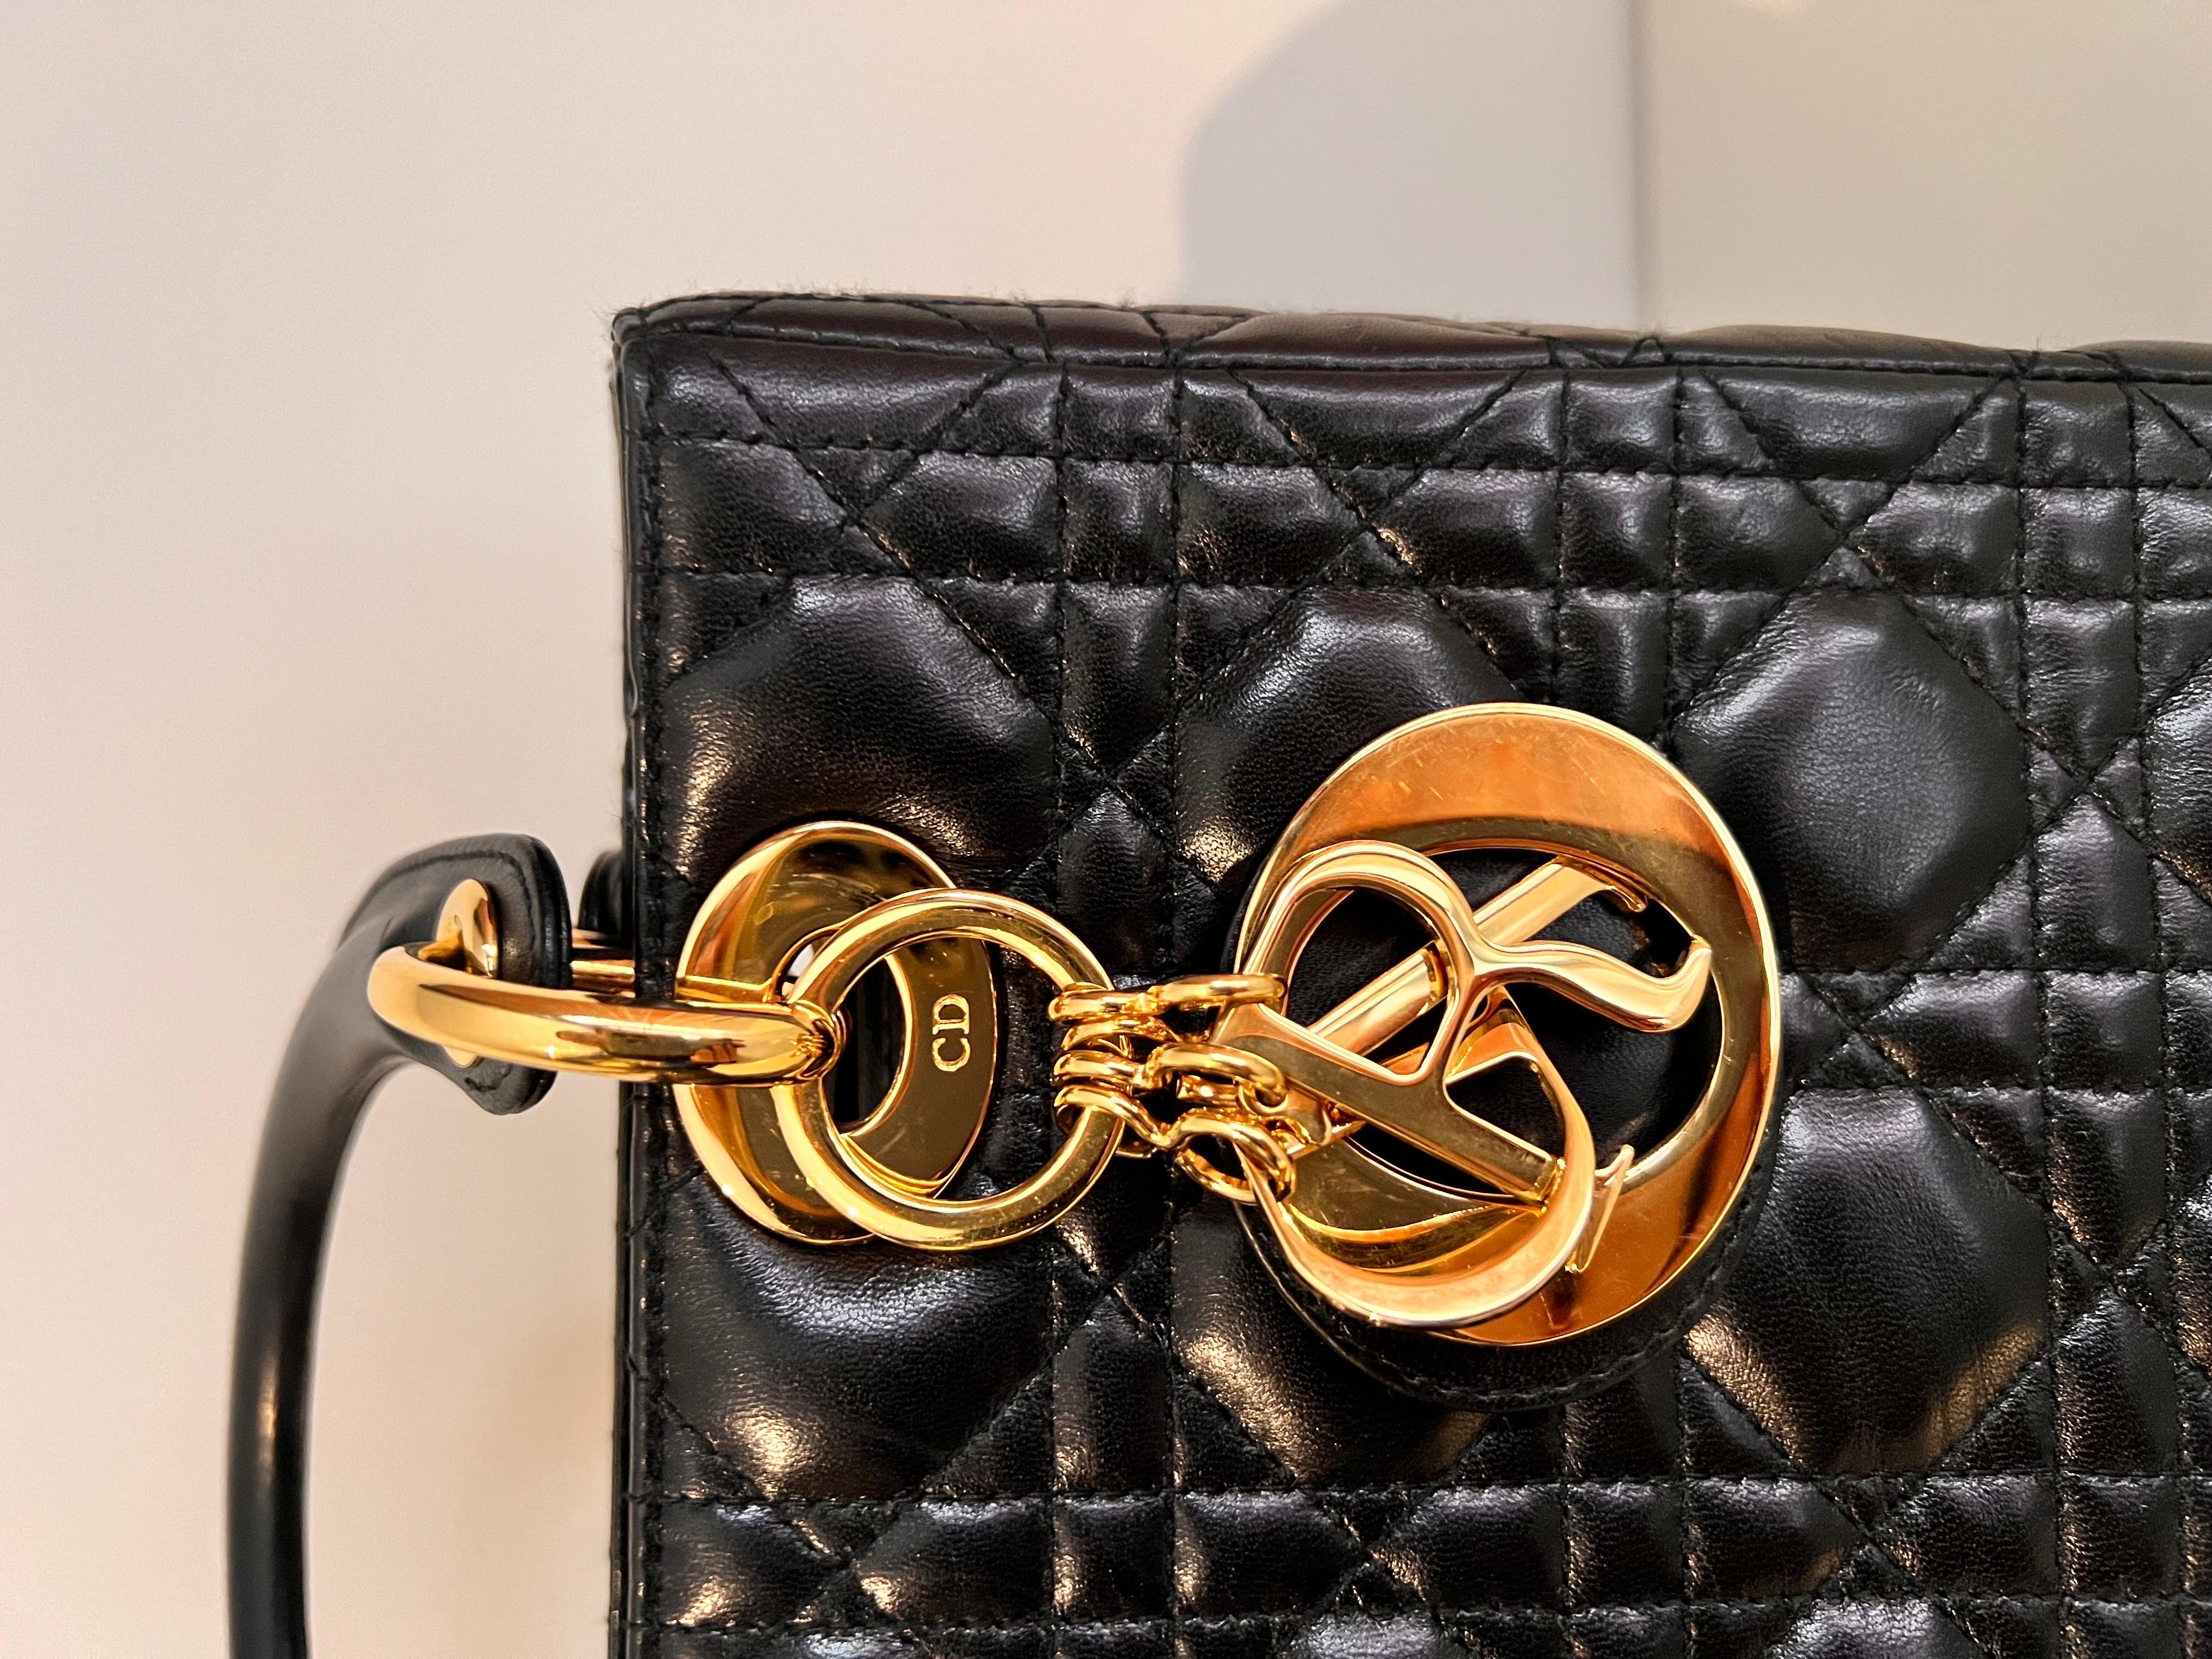 Lady DIOR quilted handbag with gold hardware, famously worn by Princess Diana  3